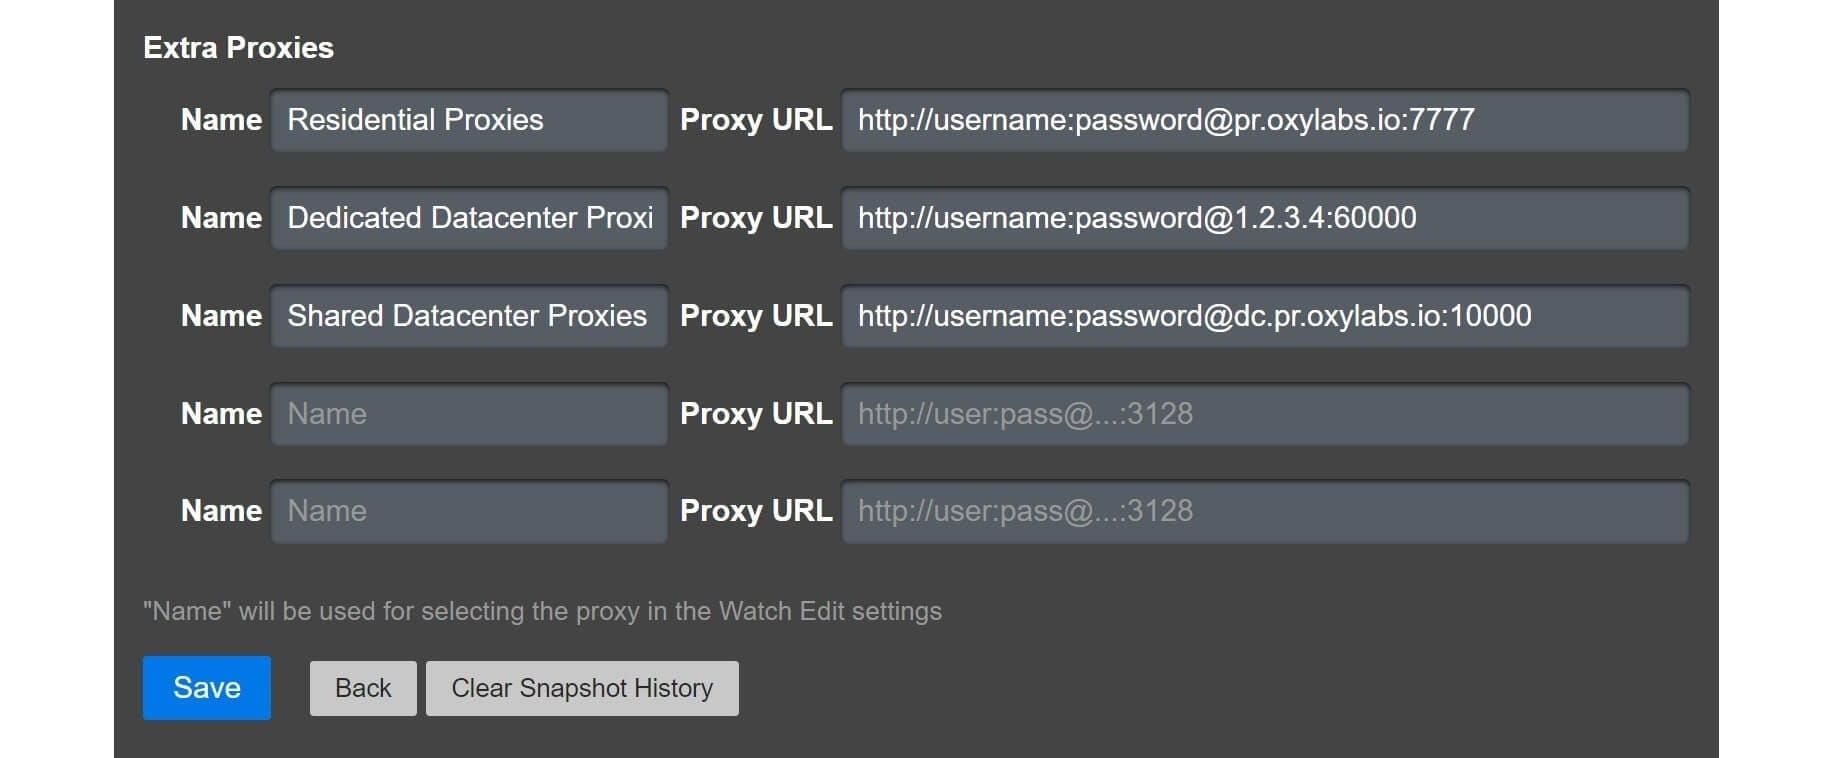 Configuring Oxylabs proxies